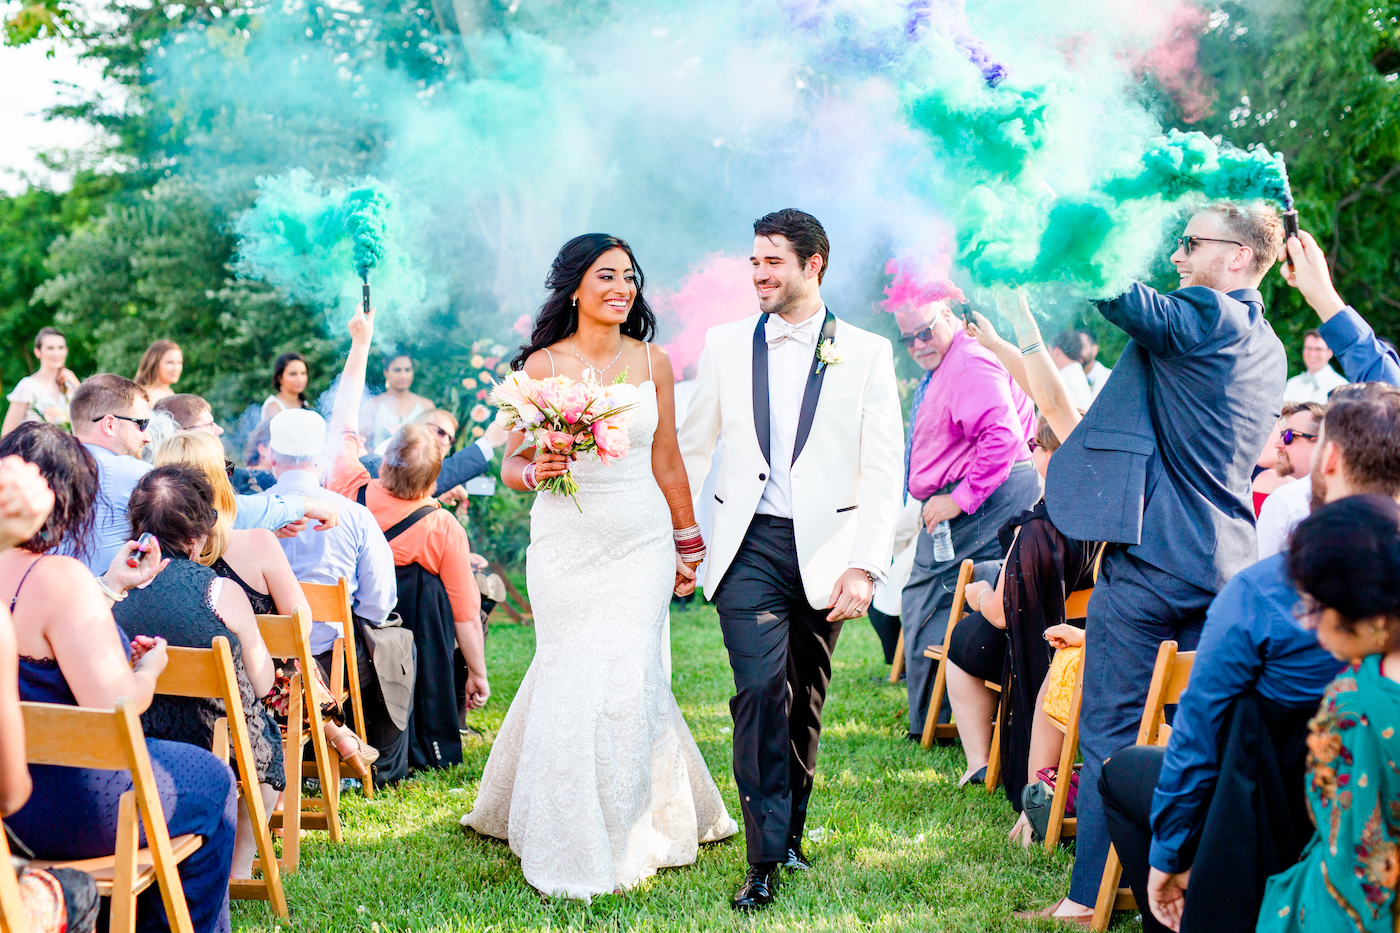 This Vibrant Virginia Wedding Included Colorful Smoke Bombs